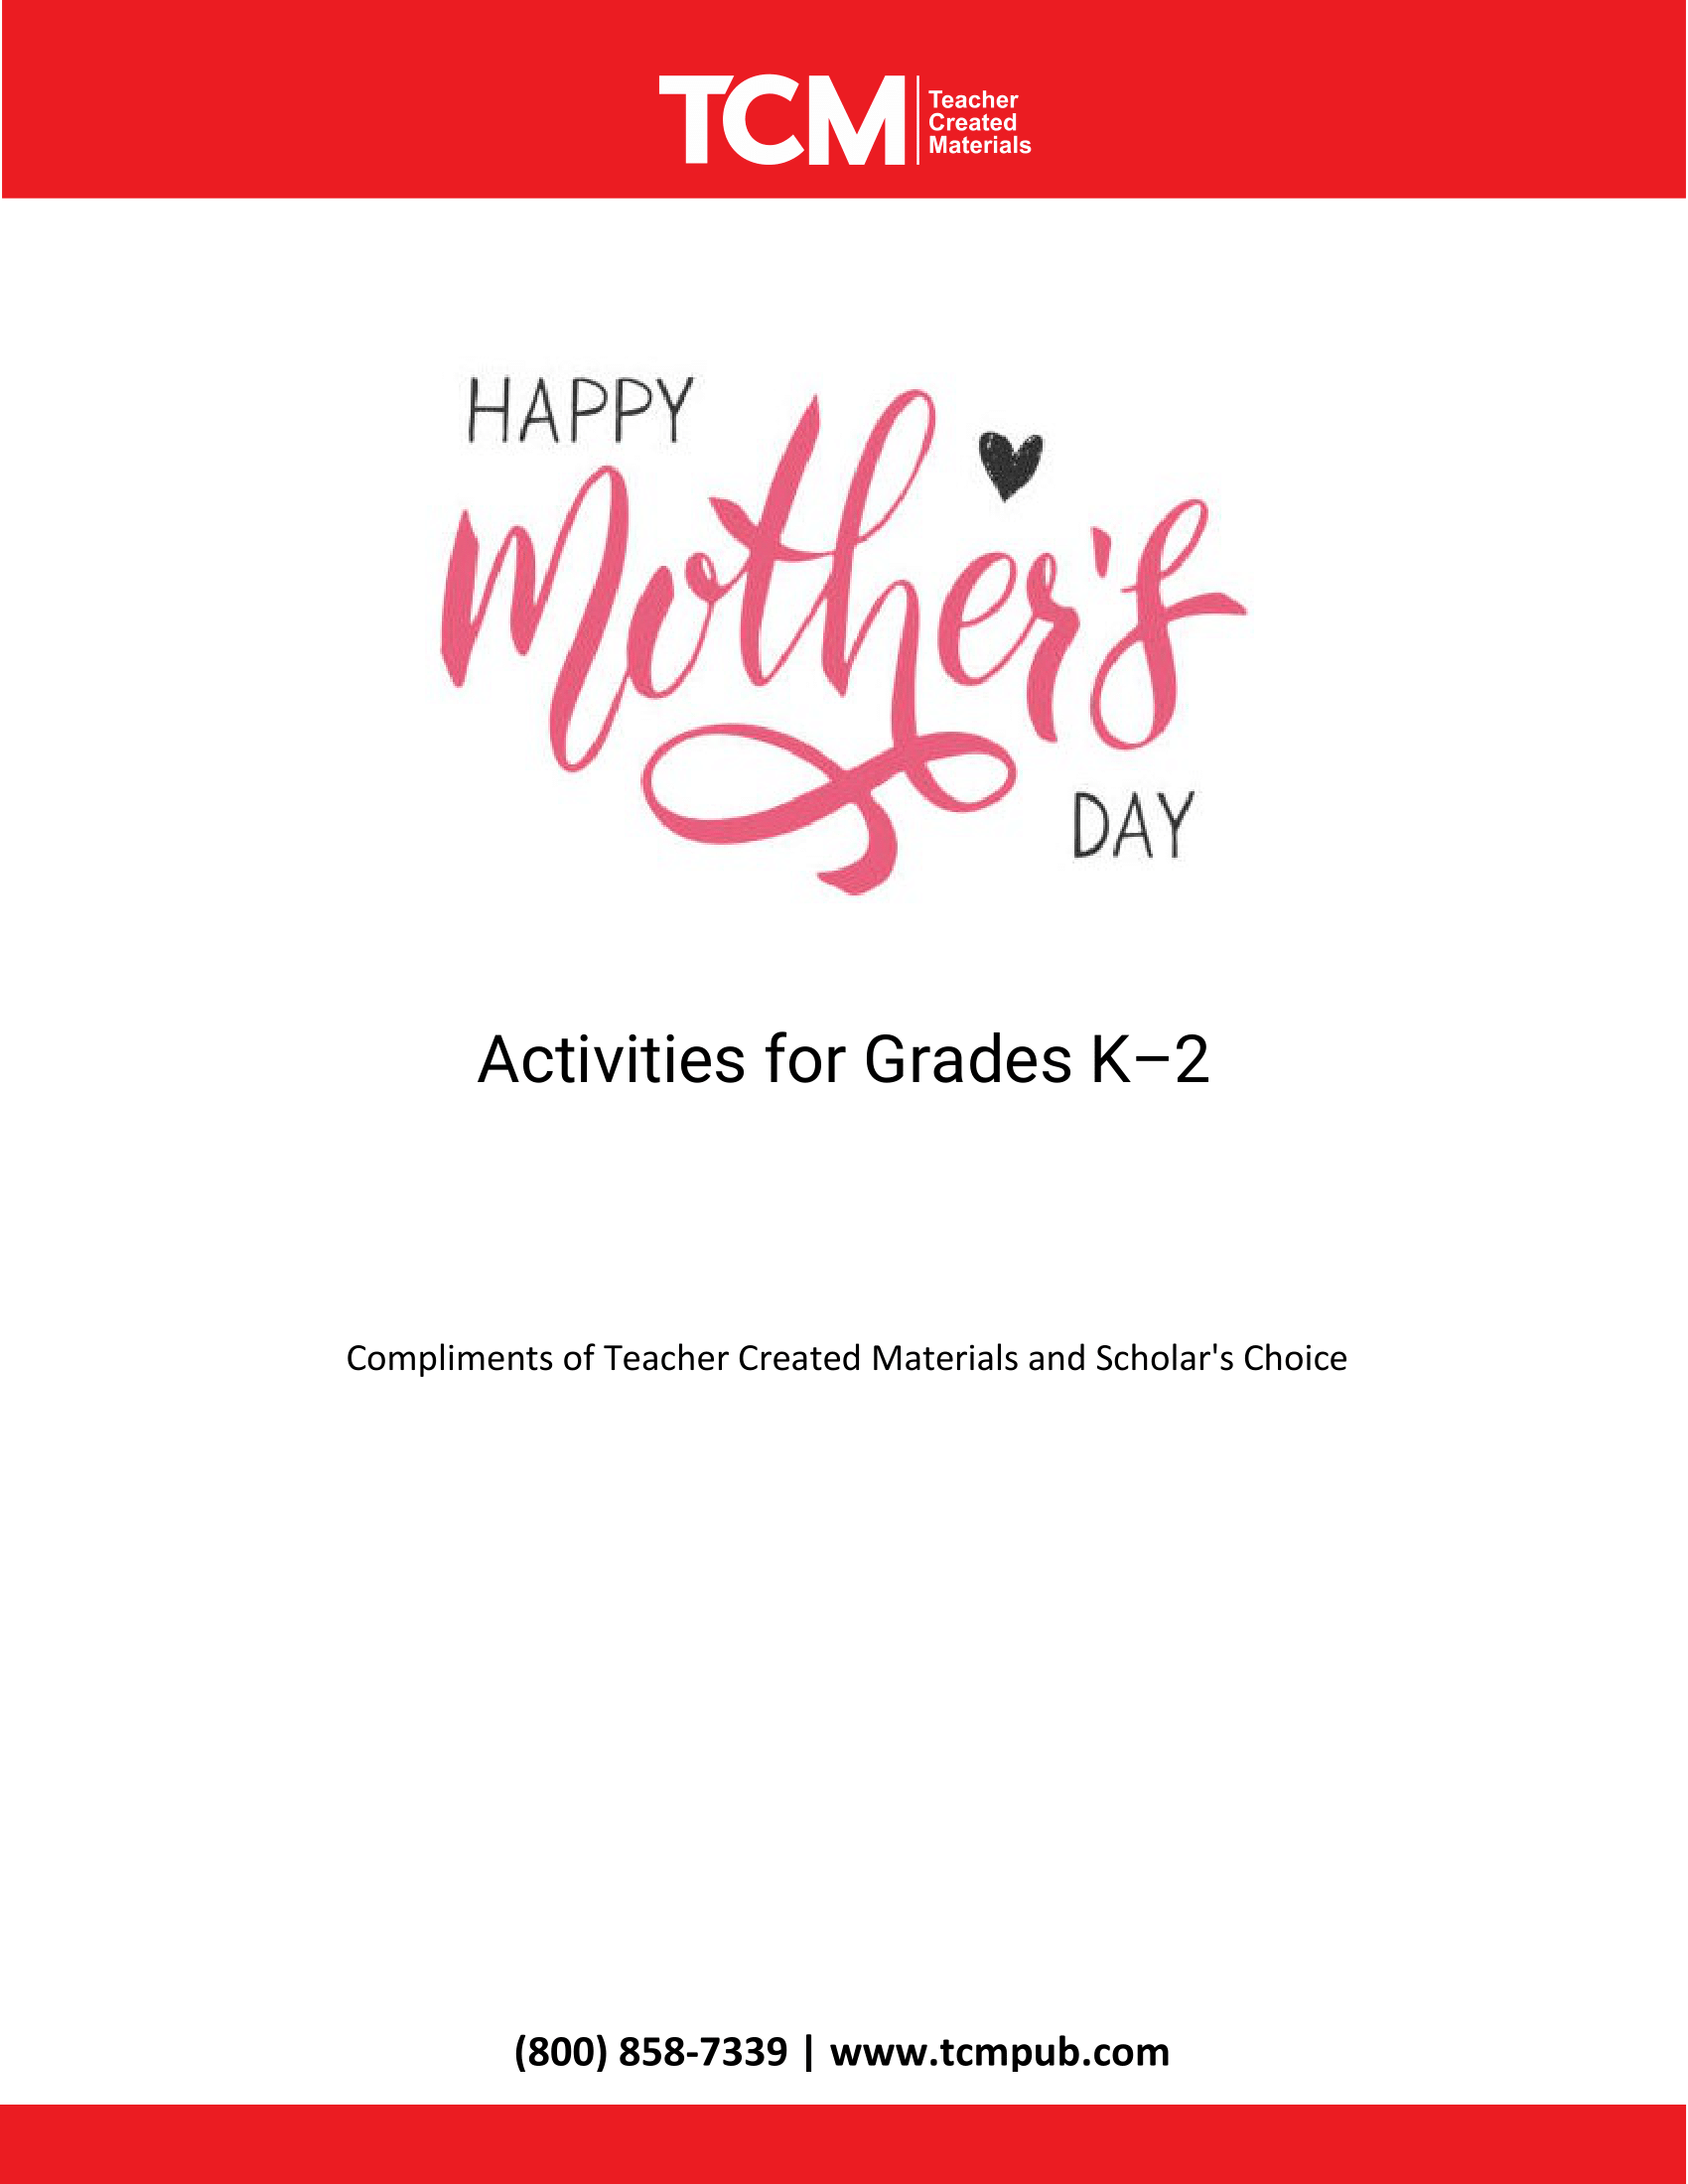 Mothers Day Activity Pages K-2-1